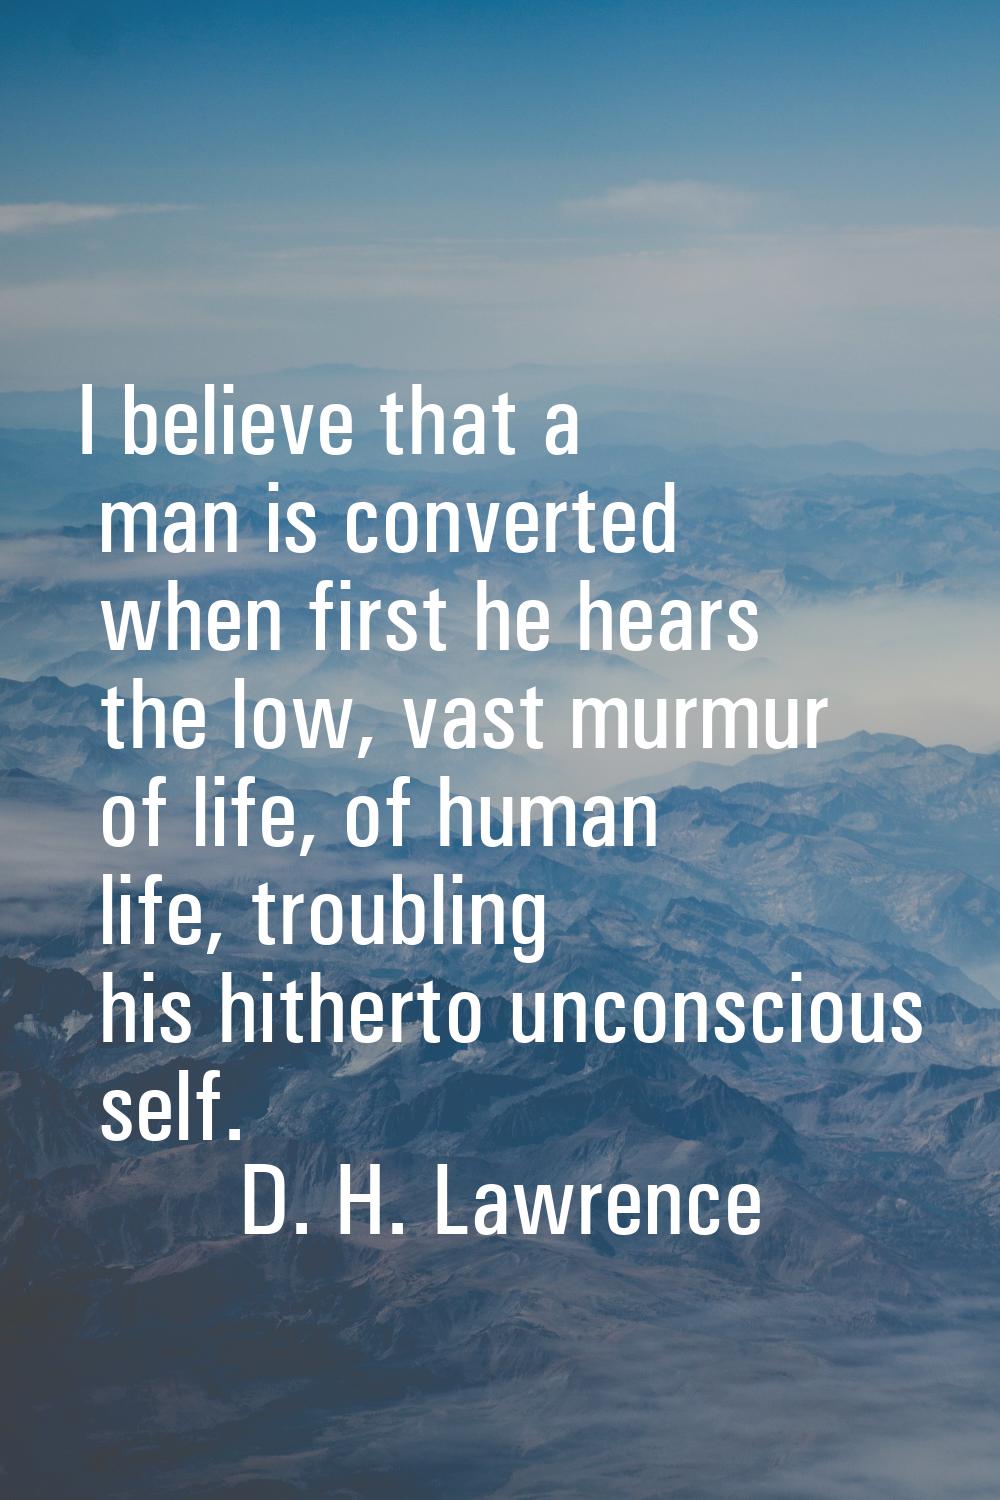 I believe that a man is converted when first he hears the low, vast murmur of life, of human life, 